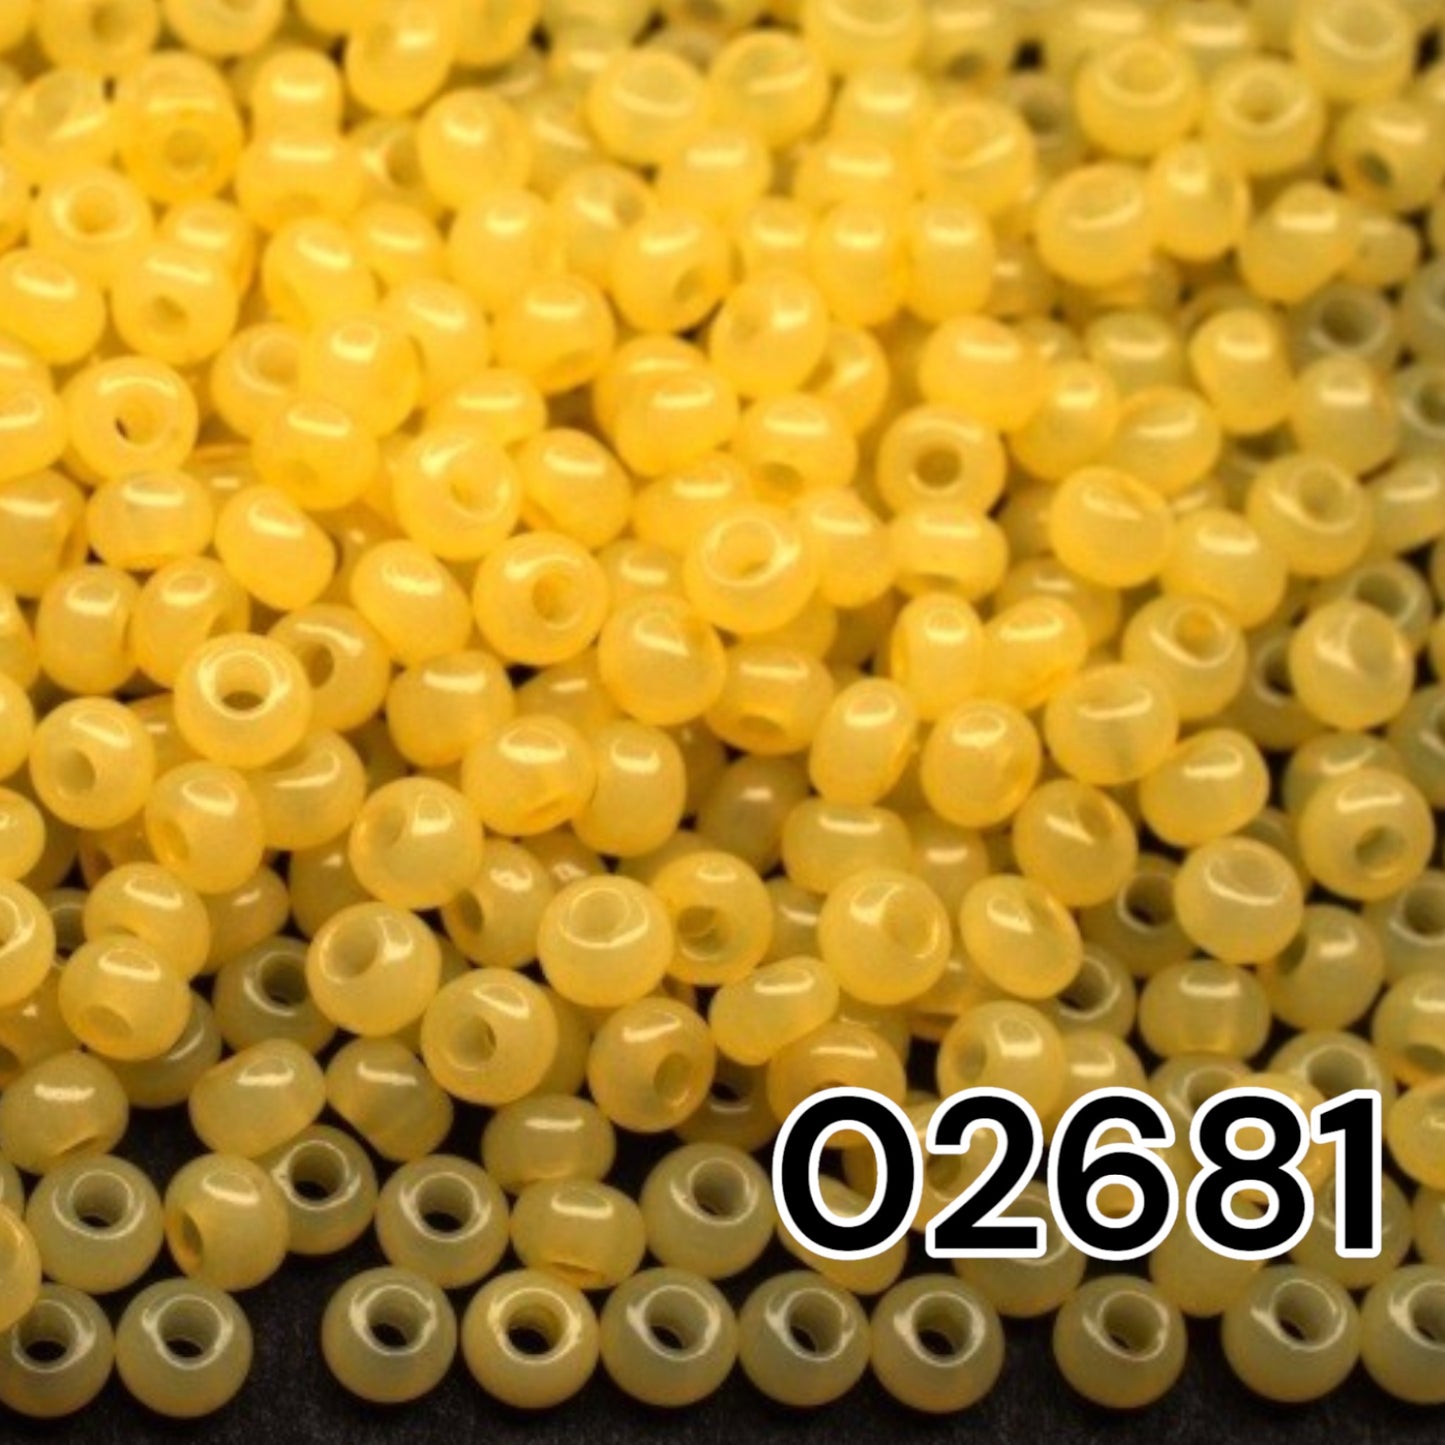 02681 Czech seed beads PRECIOSA round 10/0 yellow. Alabaster - Solgel Dyed.